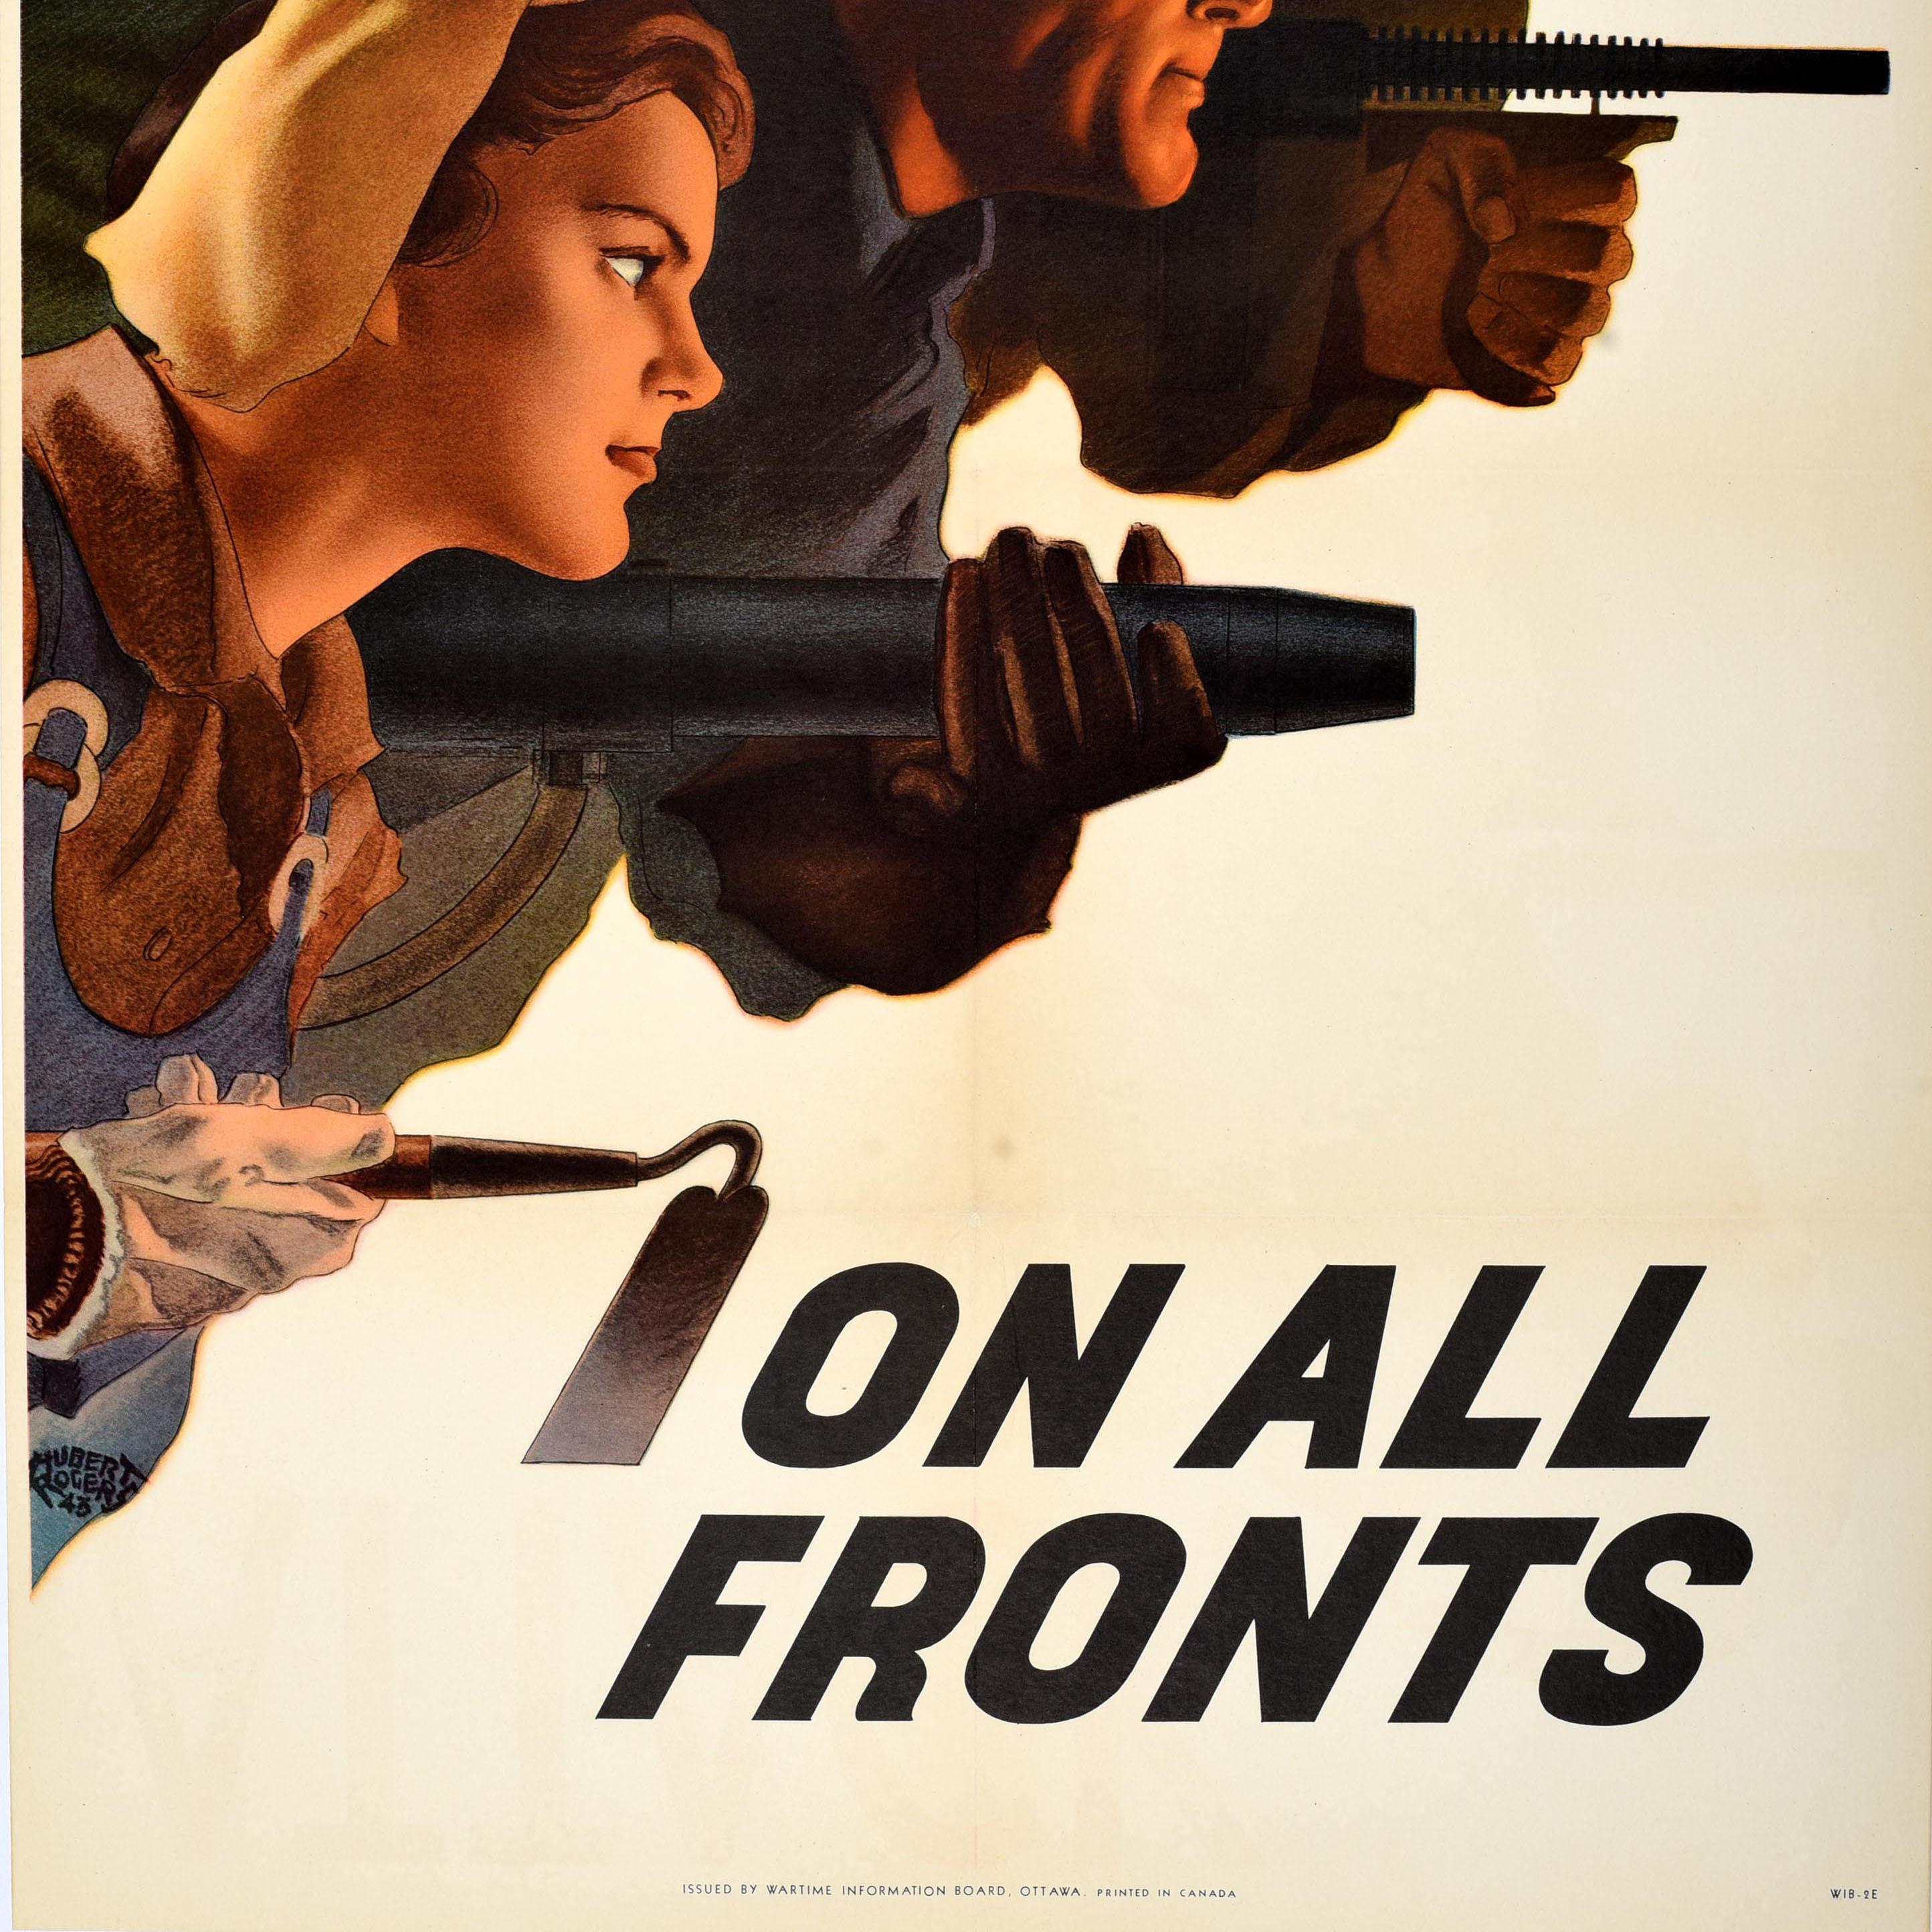 Original Vintage War Poster Attack On All Fronts WWII Canada Hubert Rogers - White Print by Unknown